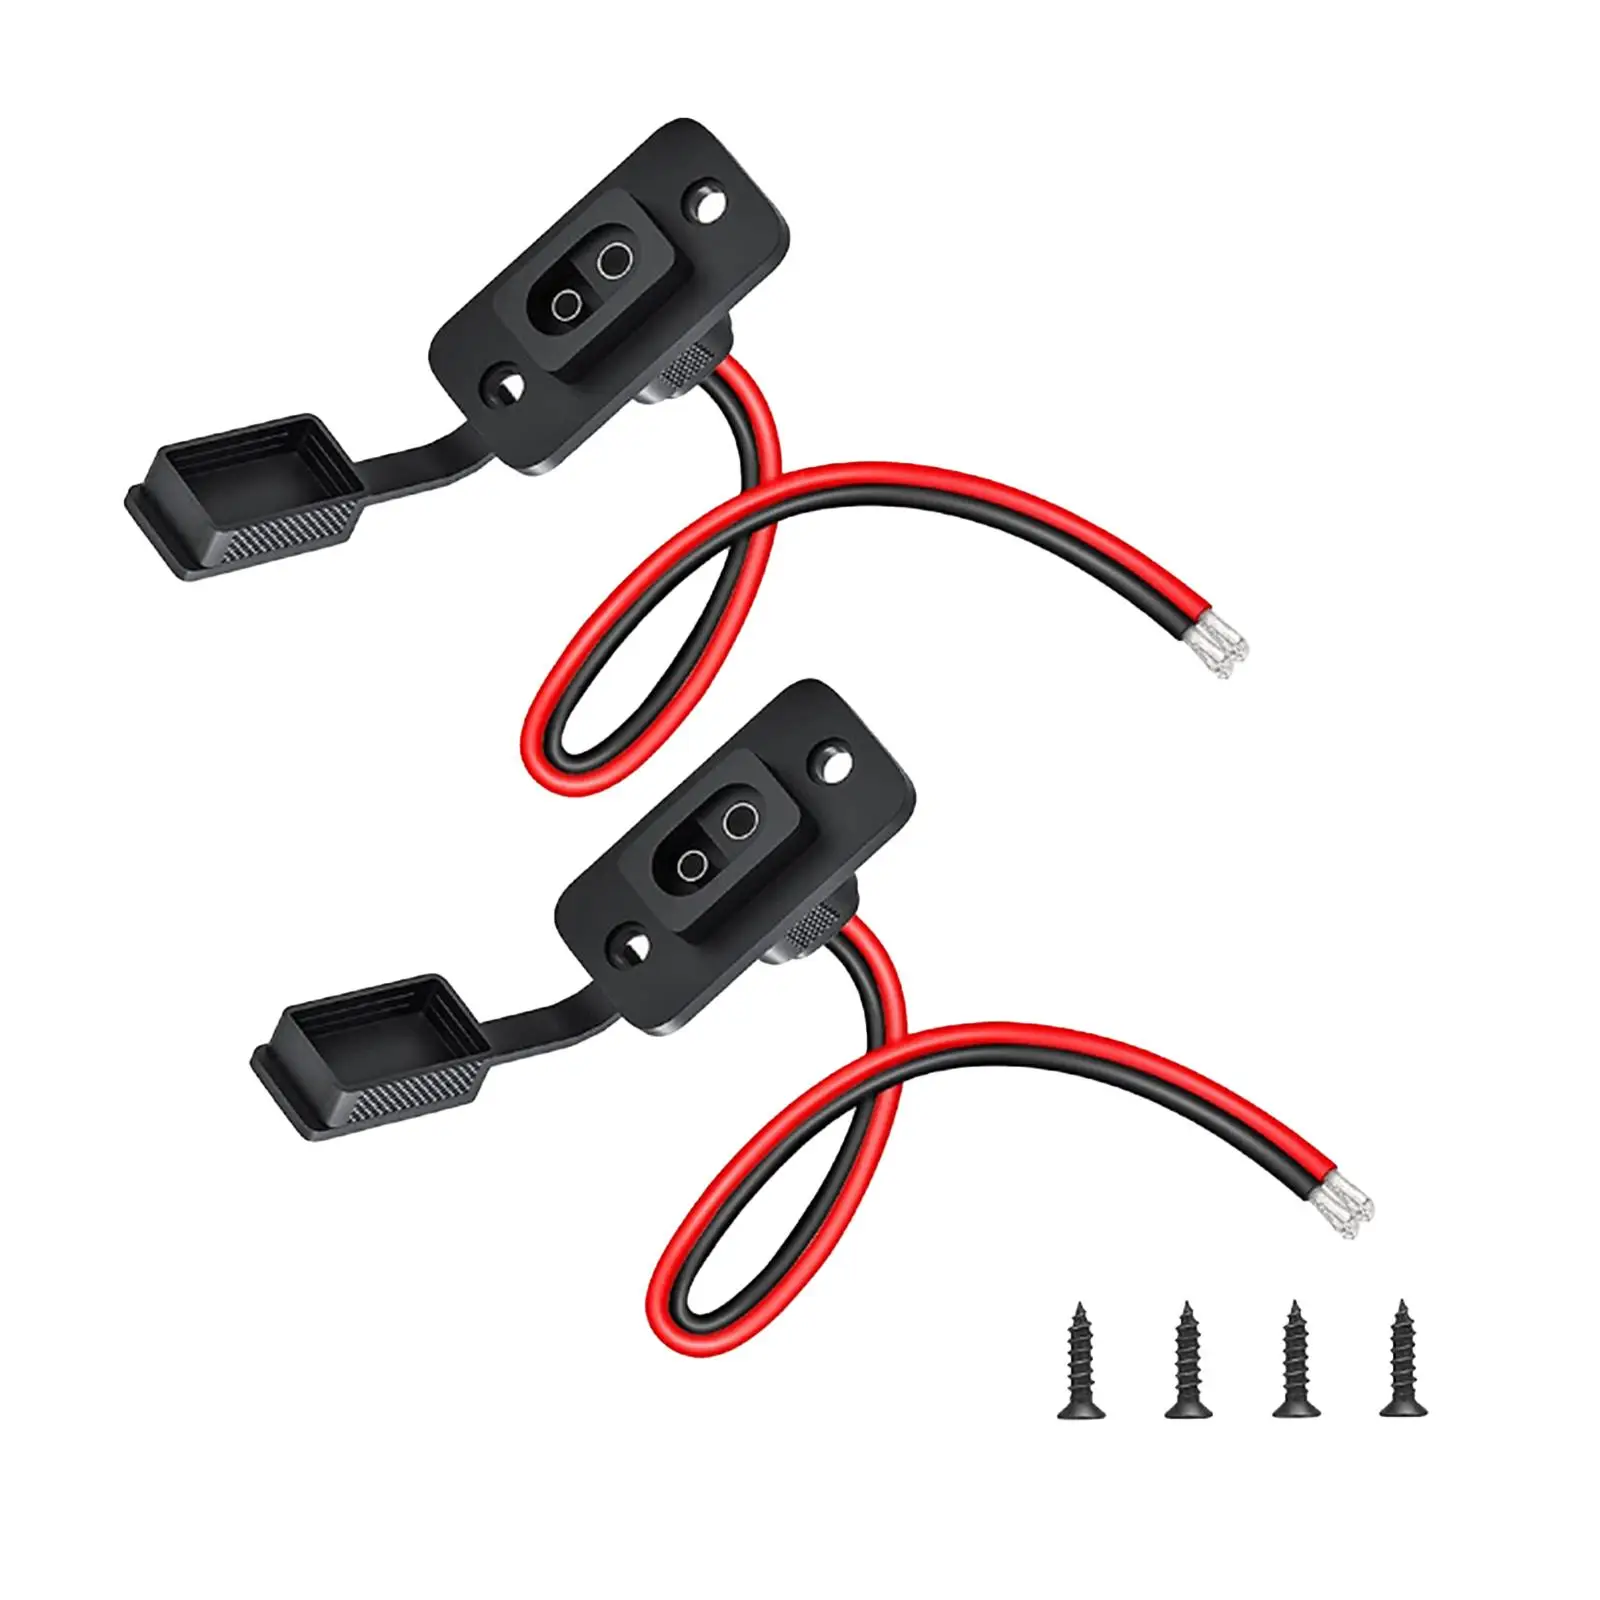 2Pcs SAE Socket Harness 2 Holes Motorcycle Connector Cables Quick Connector Waterproof Cap Tractor Sidewall Port Extension Cord